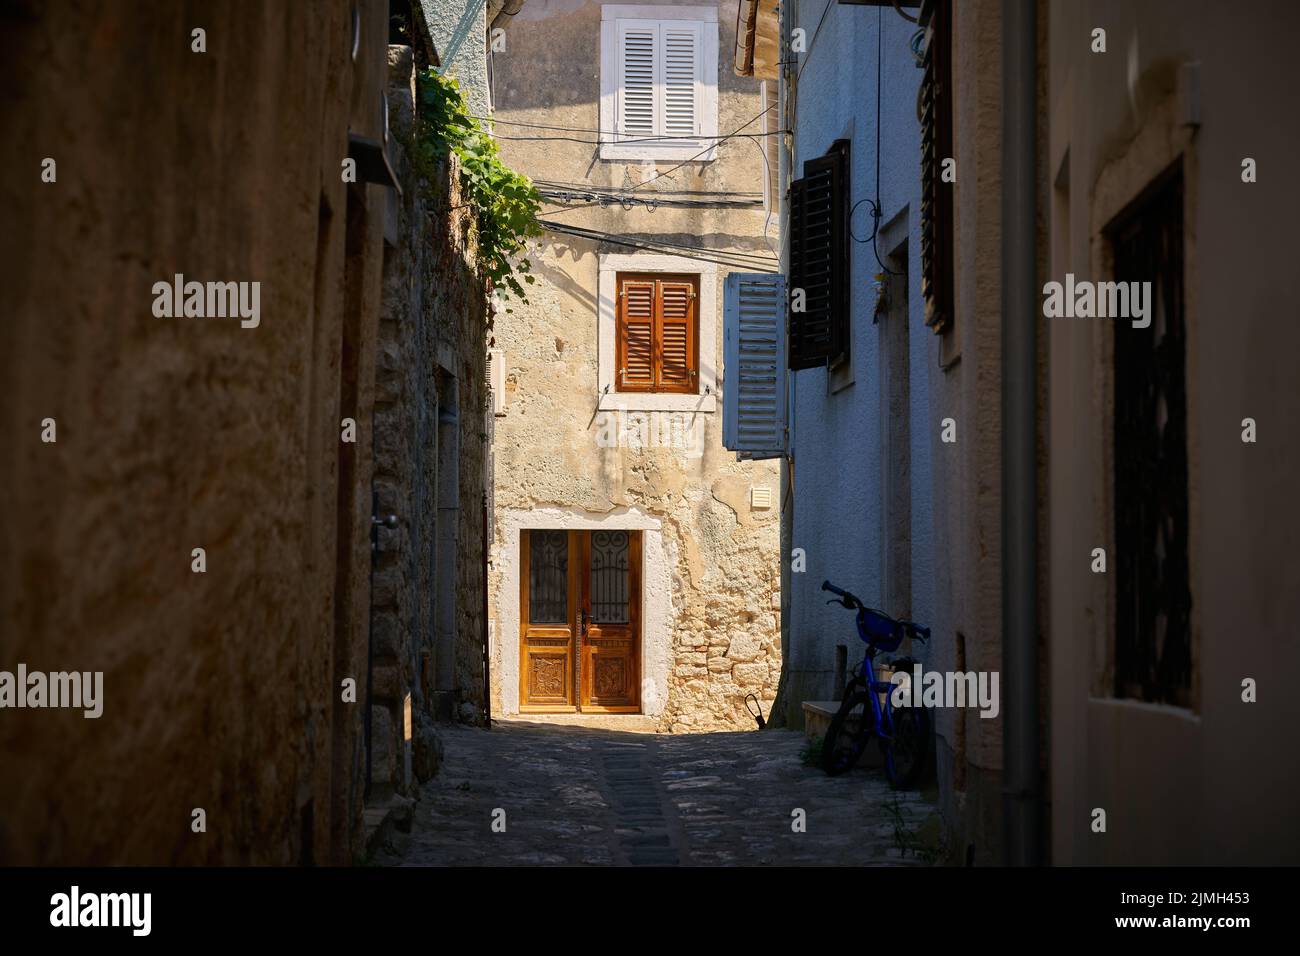 Historical for the region typical house in an alley in the old town of Krk in Croatia Stock Photo